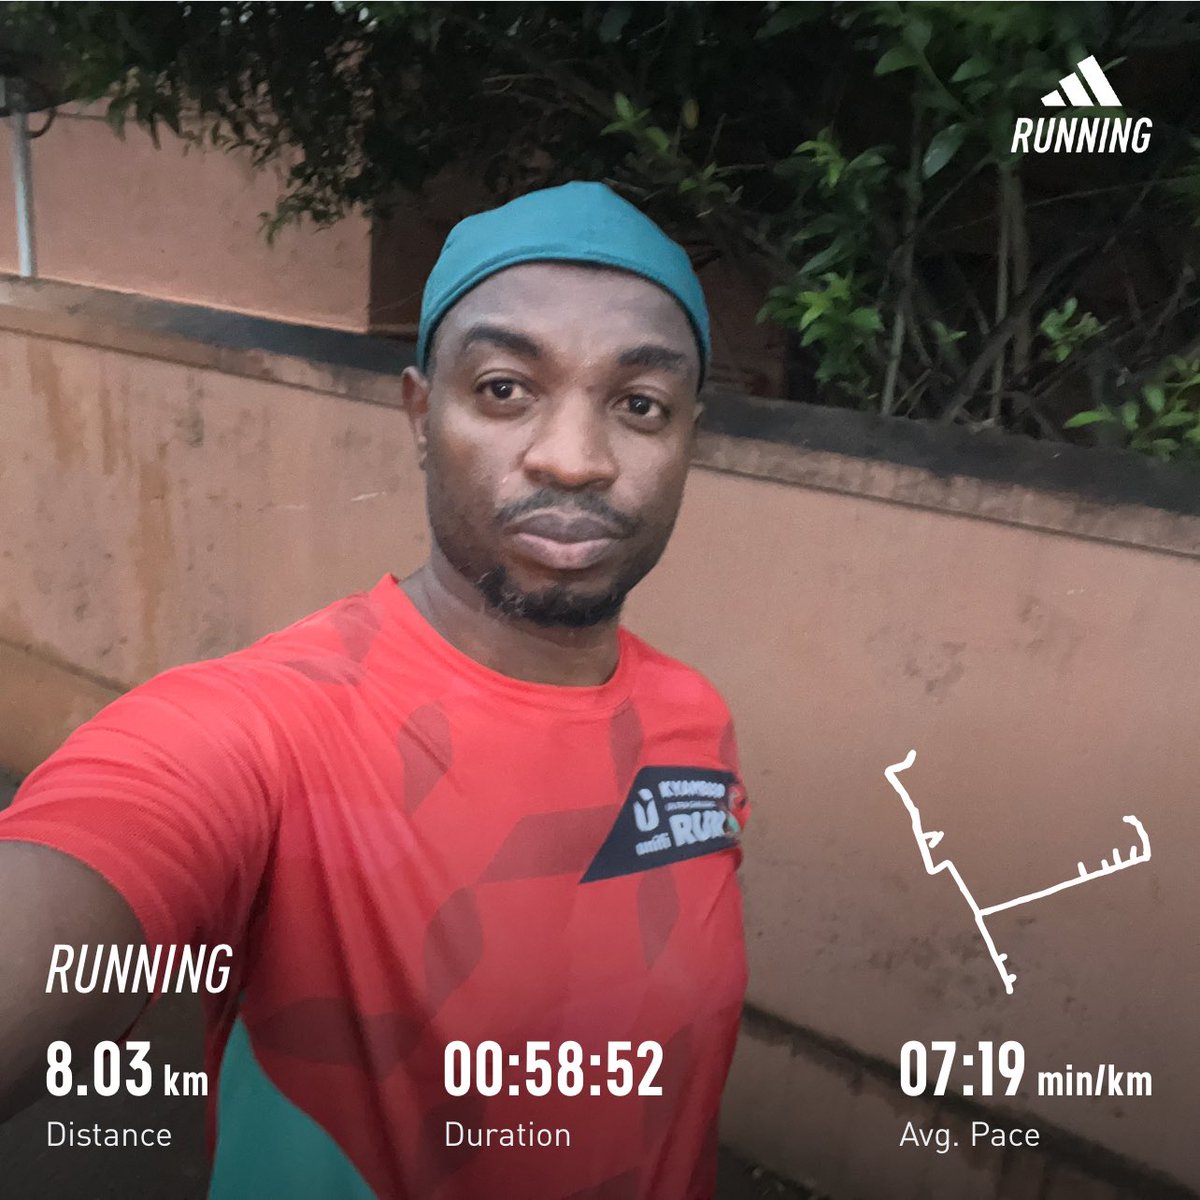 Everything you set out to do will always have a distraction… for today it was the rain, this distraction was amplified by the drips on the iron sheets! Make your resolve to execute stronger @KyambogoRun here we are…